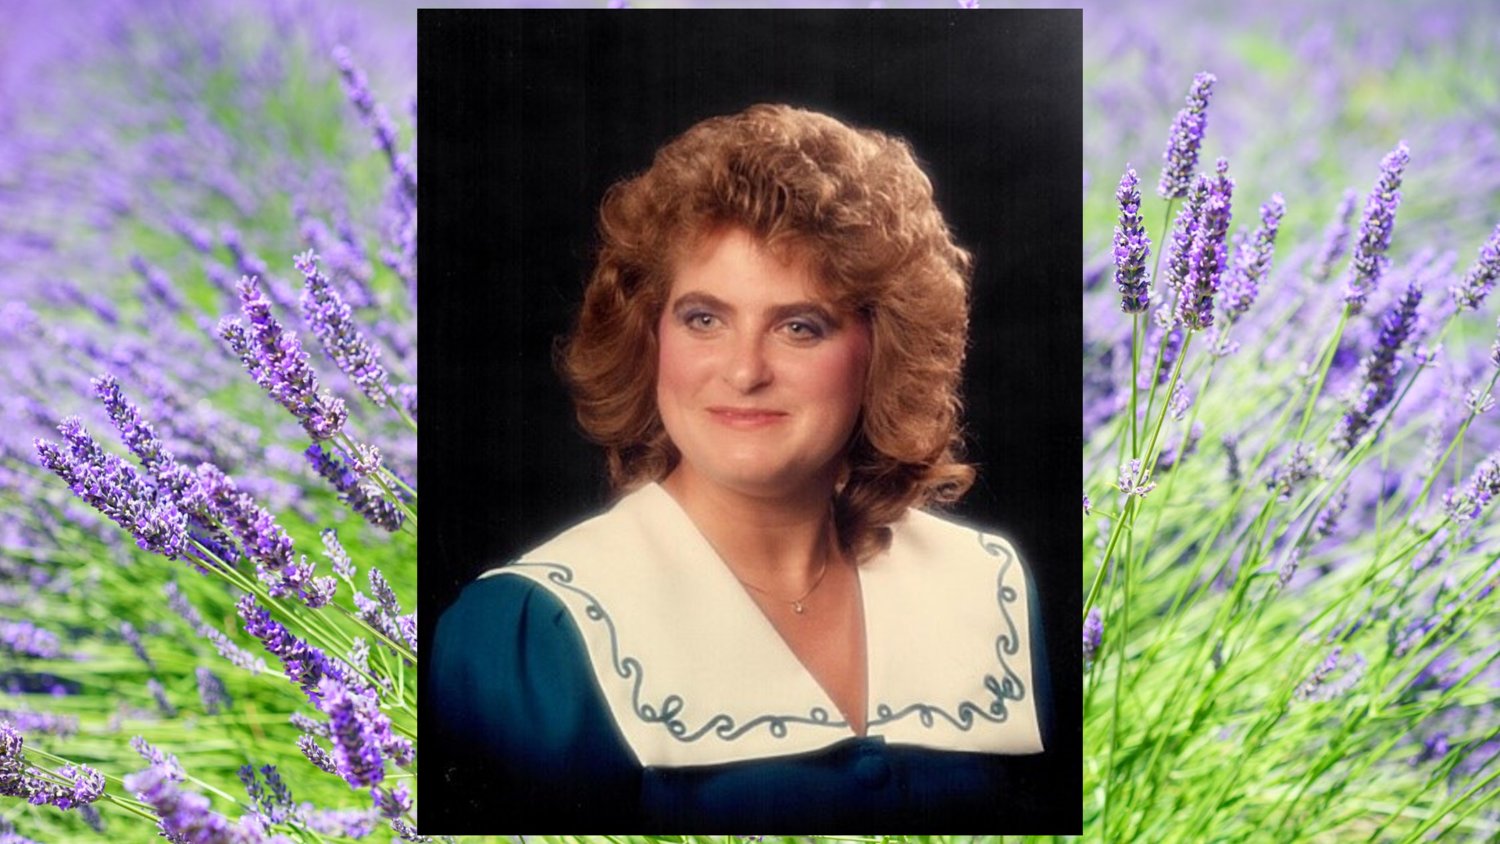 Janet Mettey passed away July 26. She was a long-time Katy resident and proud aunt who enjoyed watching her nieces and nephews in sports and watching monster truck rallies. She is deeply missed by her family and loved ones.